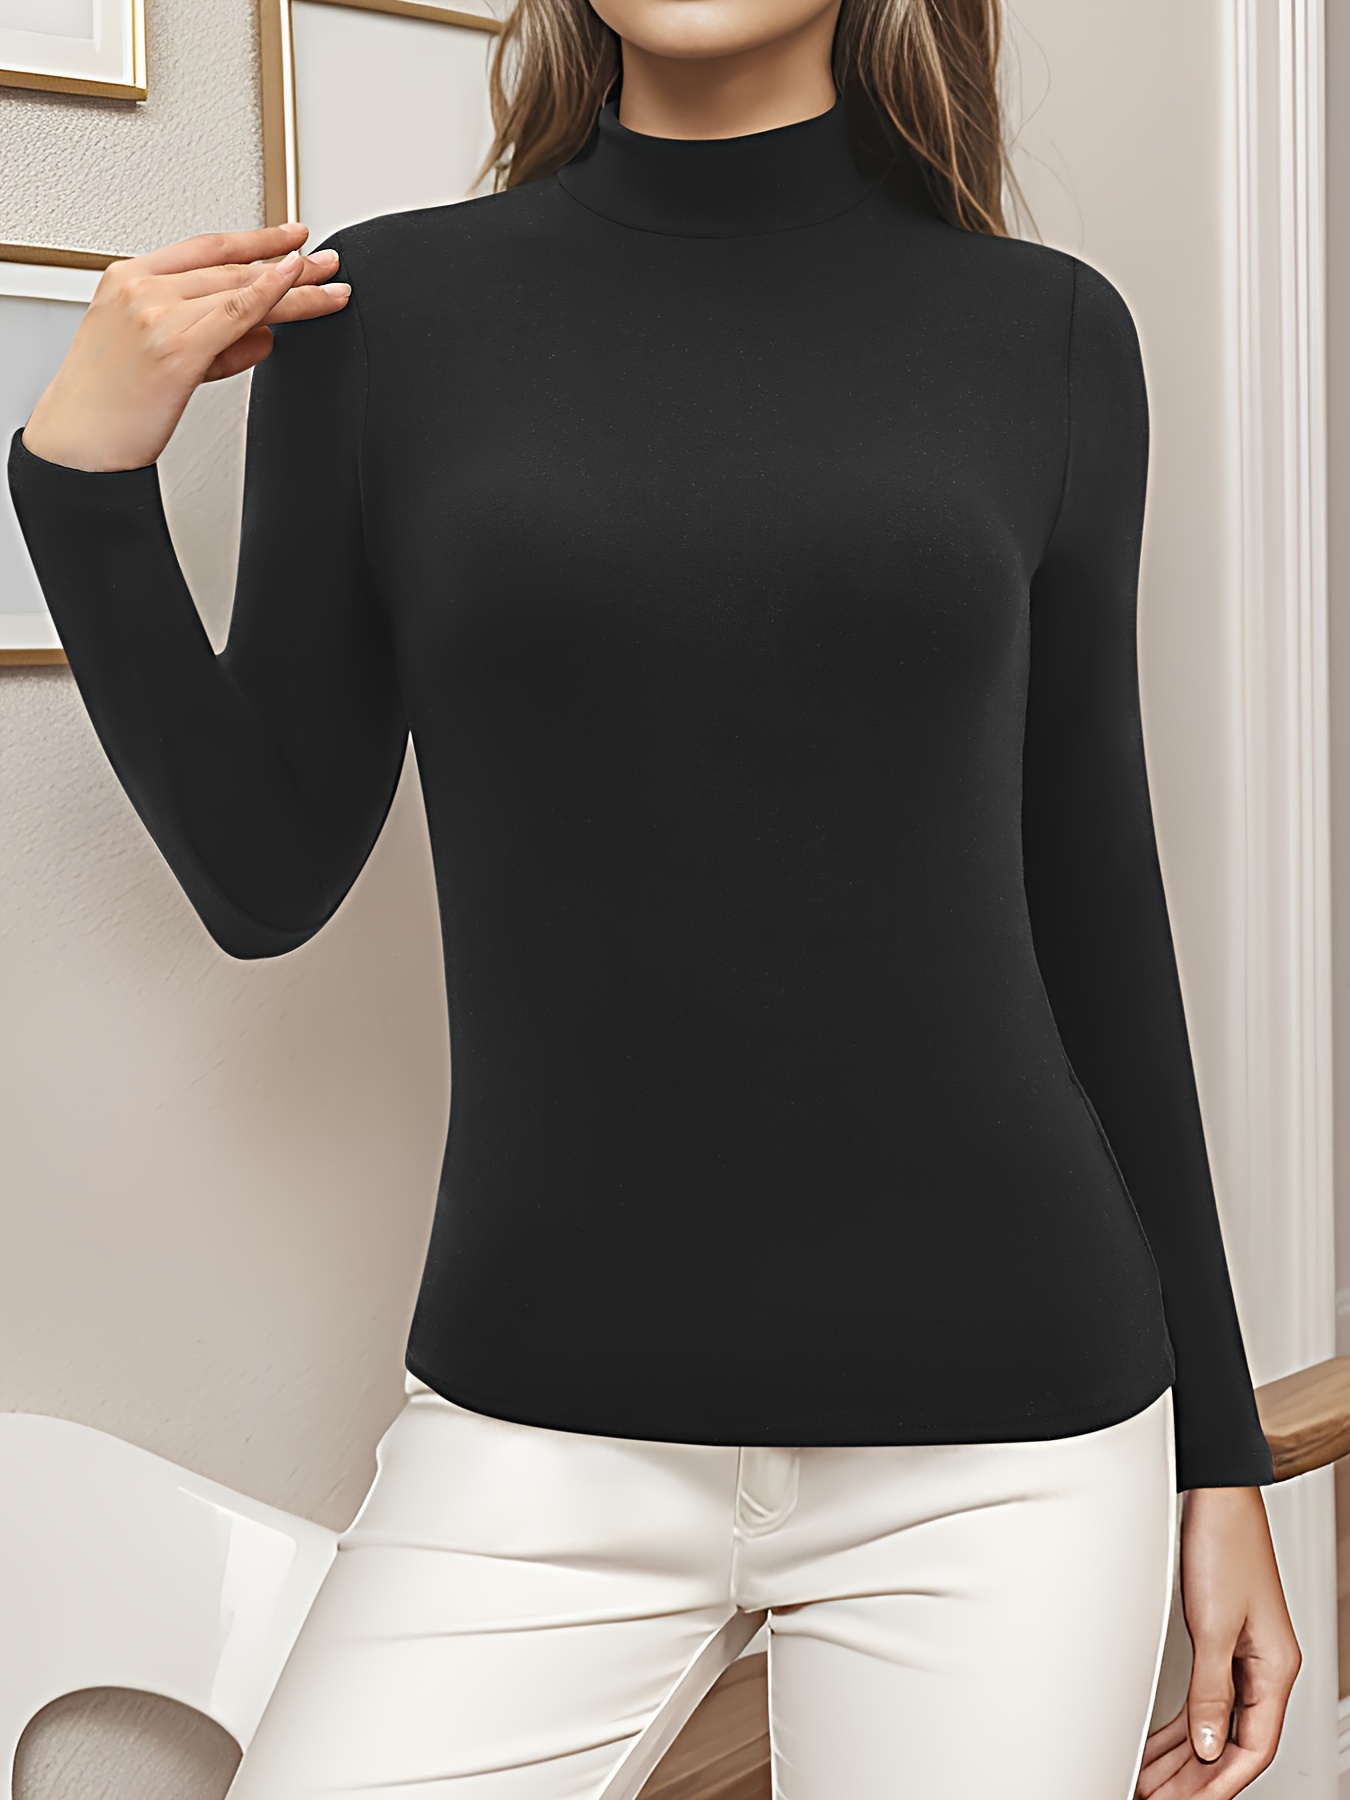 Mock Neck Thermal Underwear Top Soft Comfortable Long Sleeve